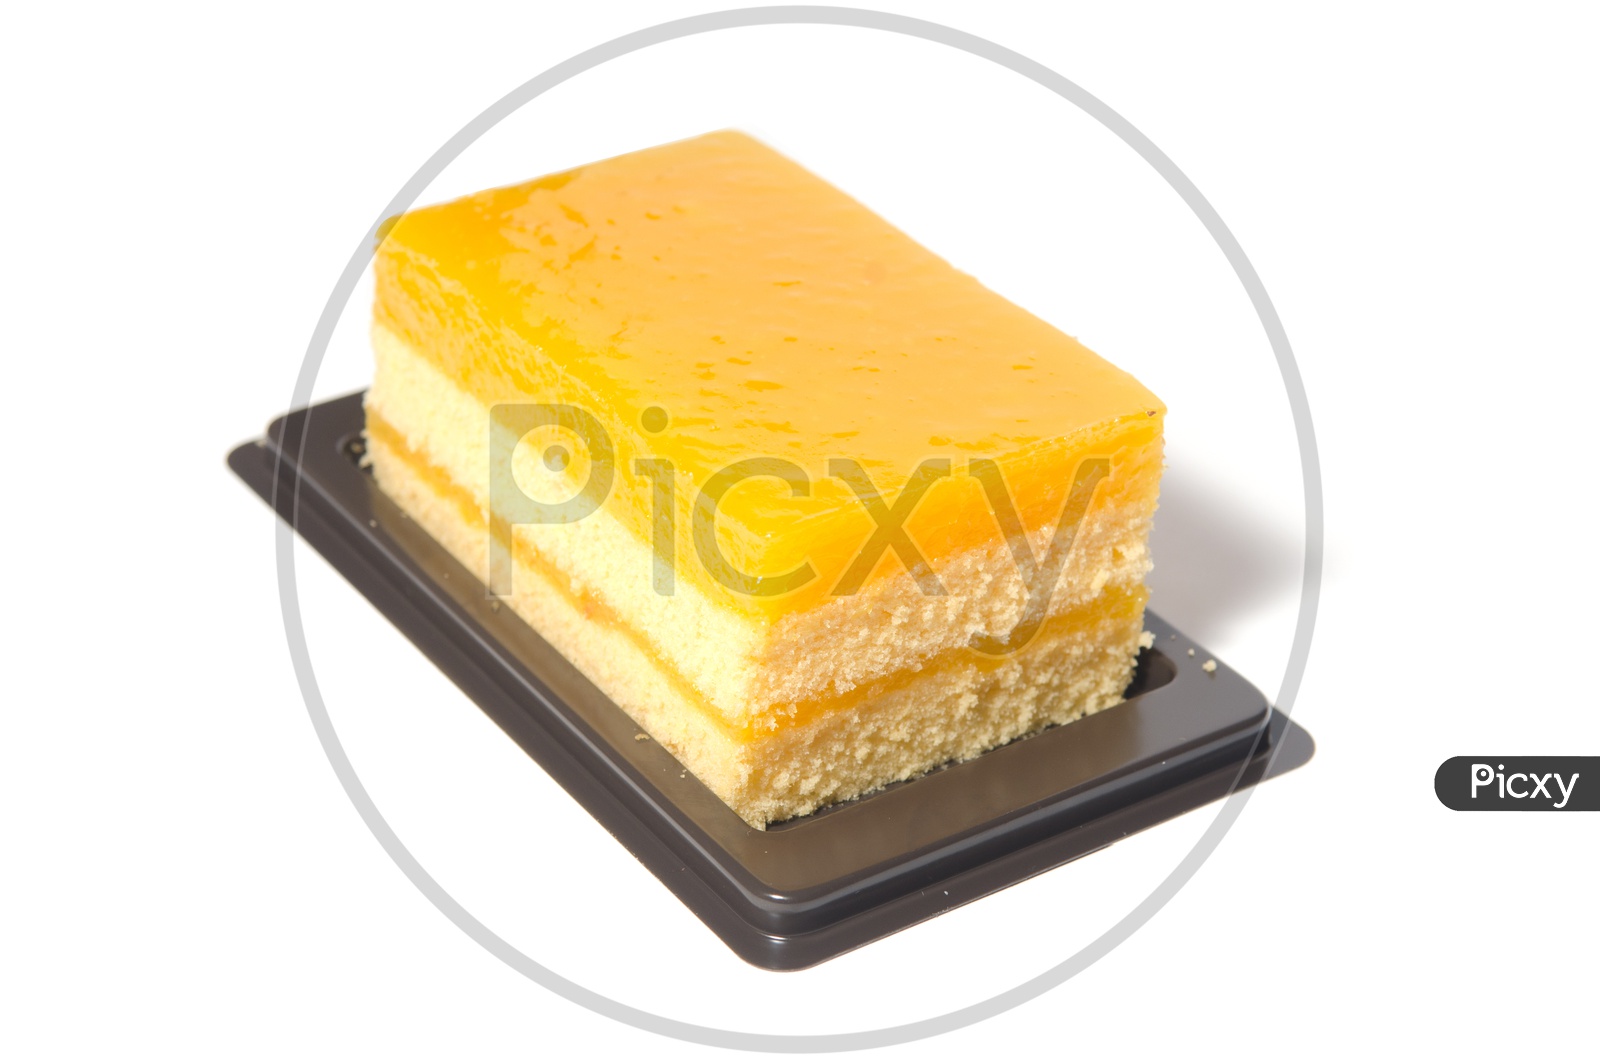 A Pastry orange cake served in a plate